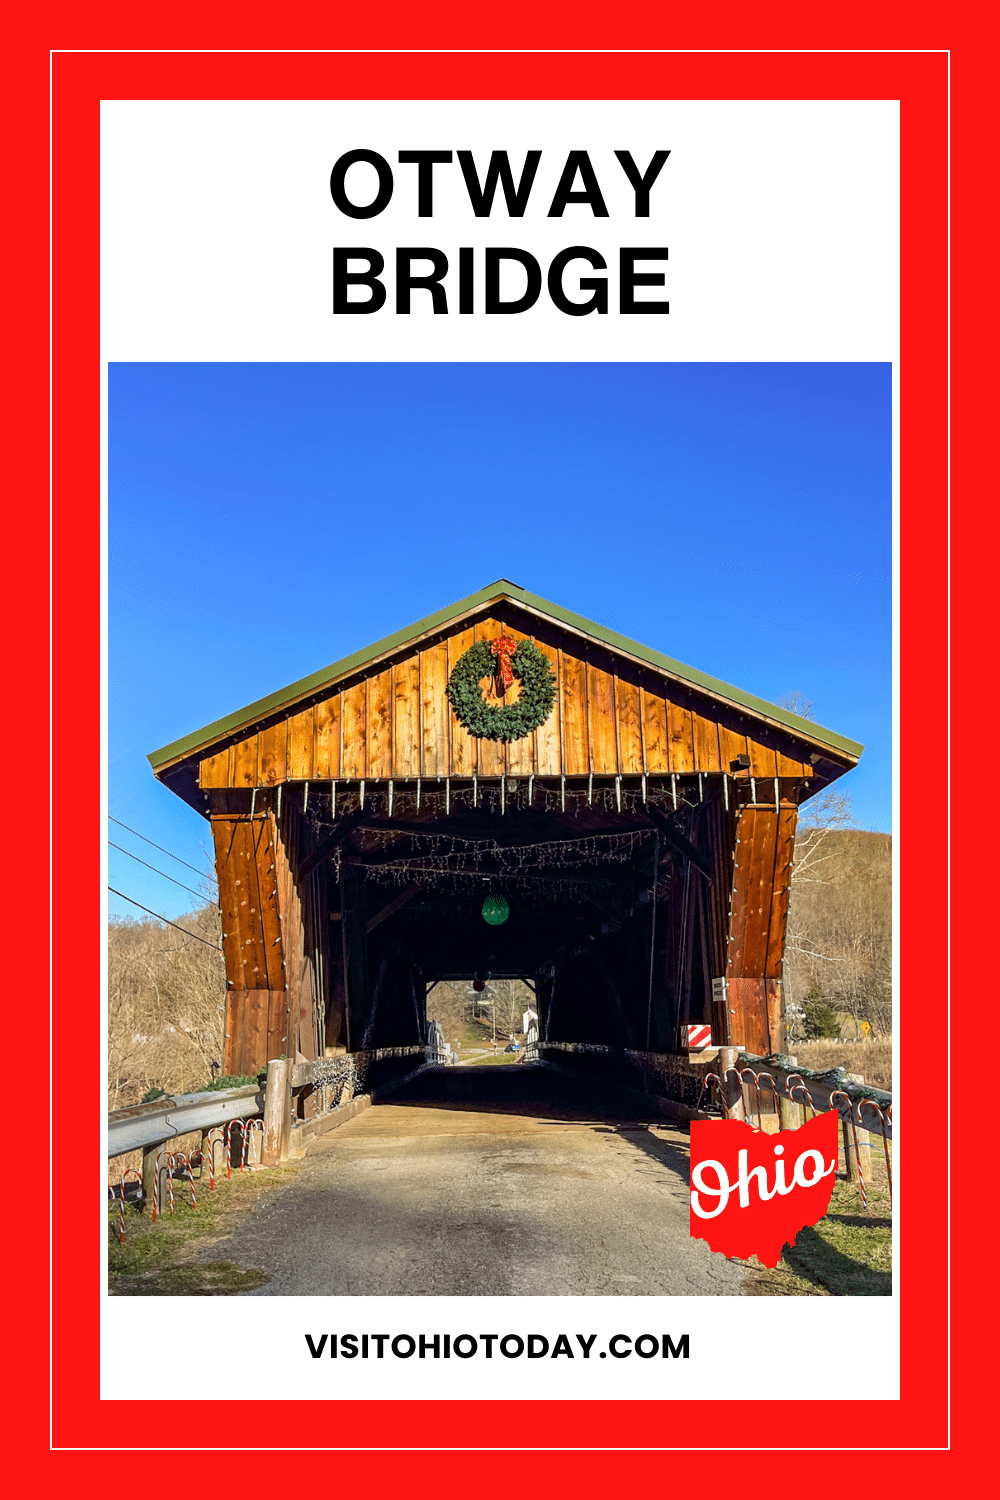 Otway Bridge is a historic landmark built in 1874 and is Scioto County’s last remaining covered bridge. It was restored in 2014.